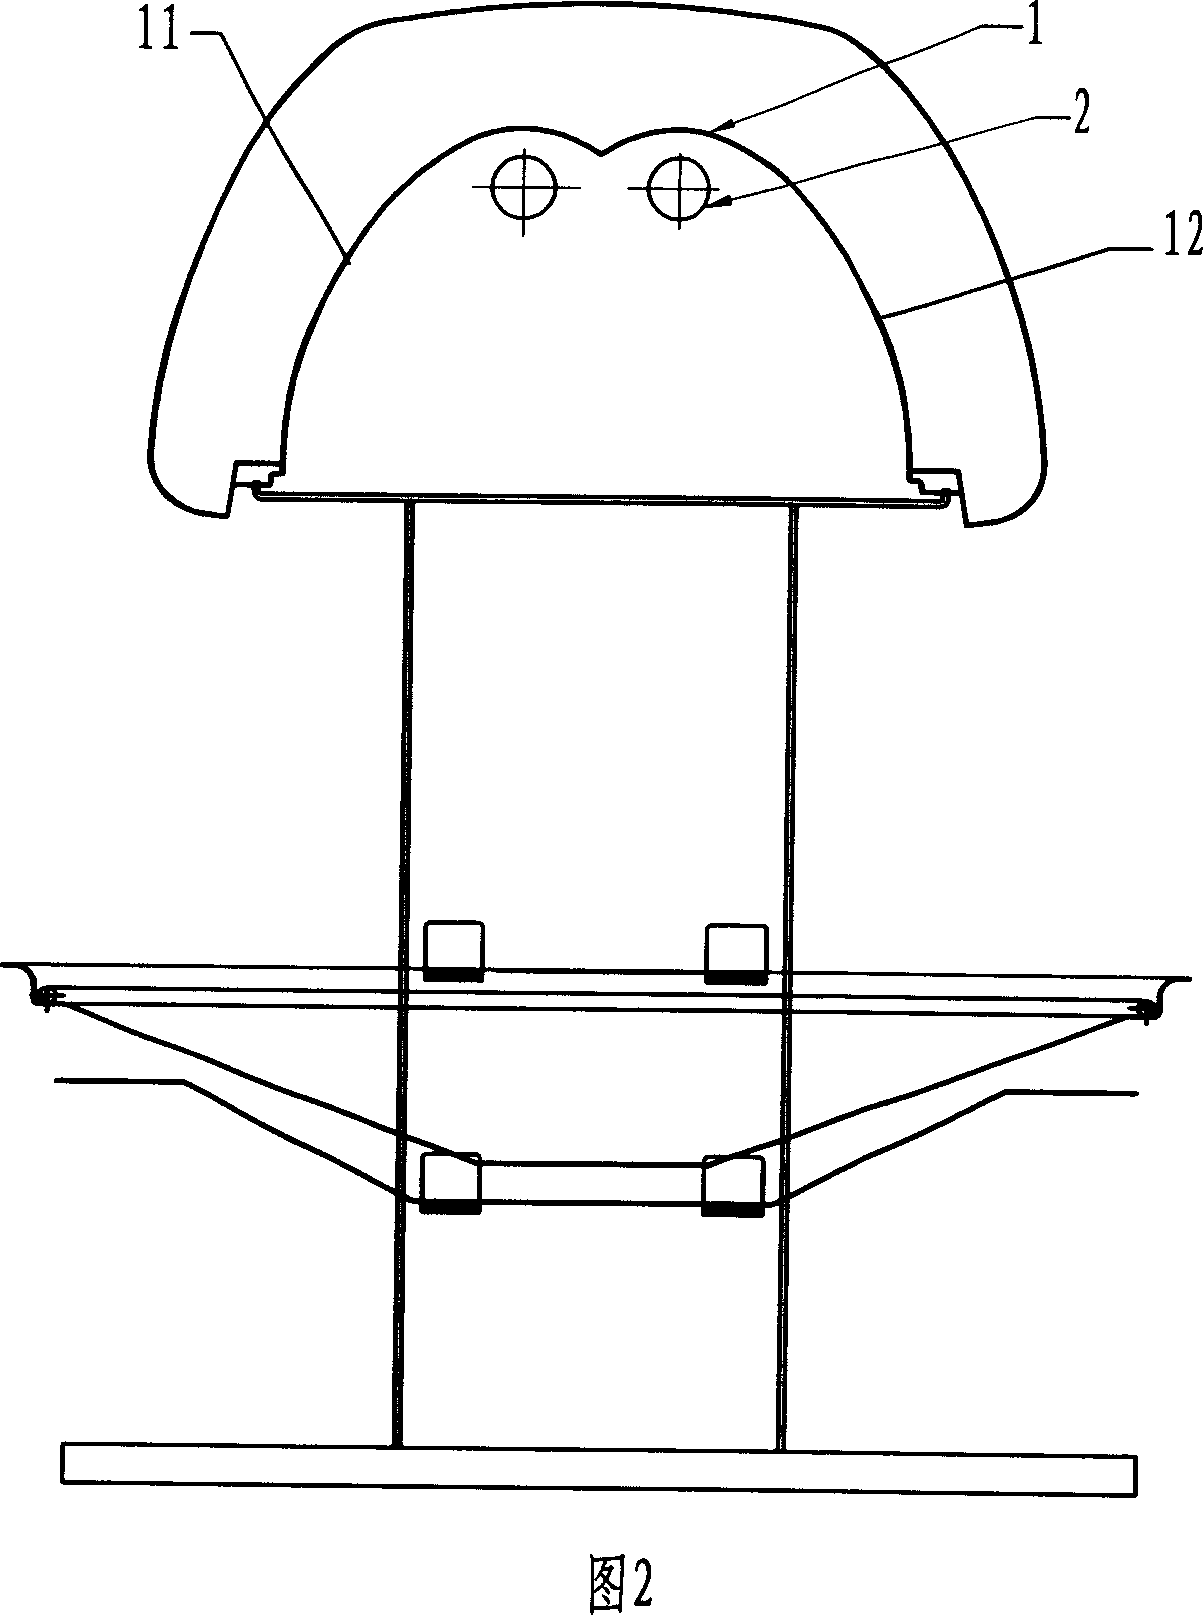 Reflector for electric heating barbecue apparatus